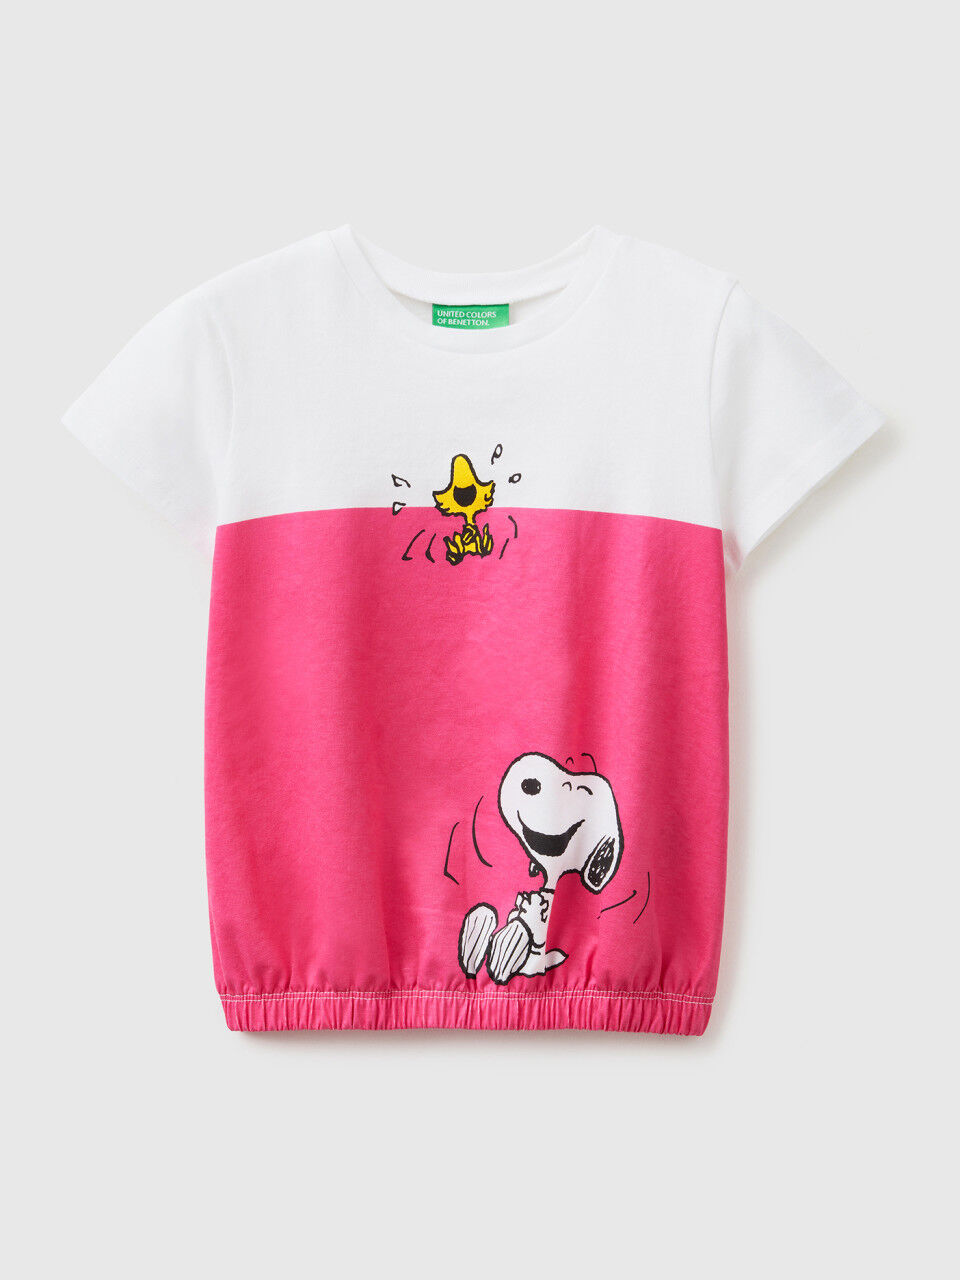 Peanuts t-shirt with elastic at the bottom